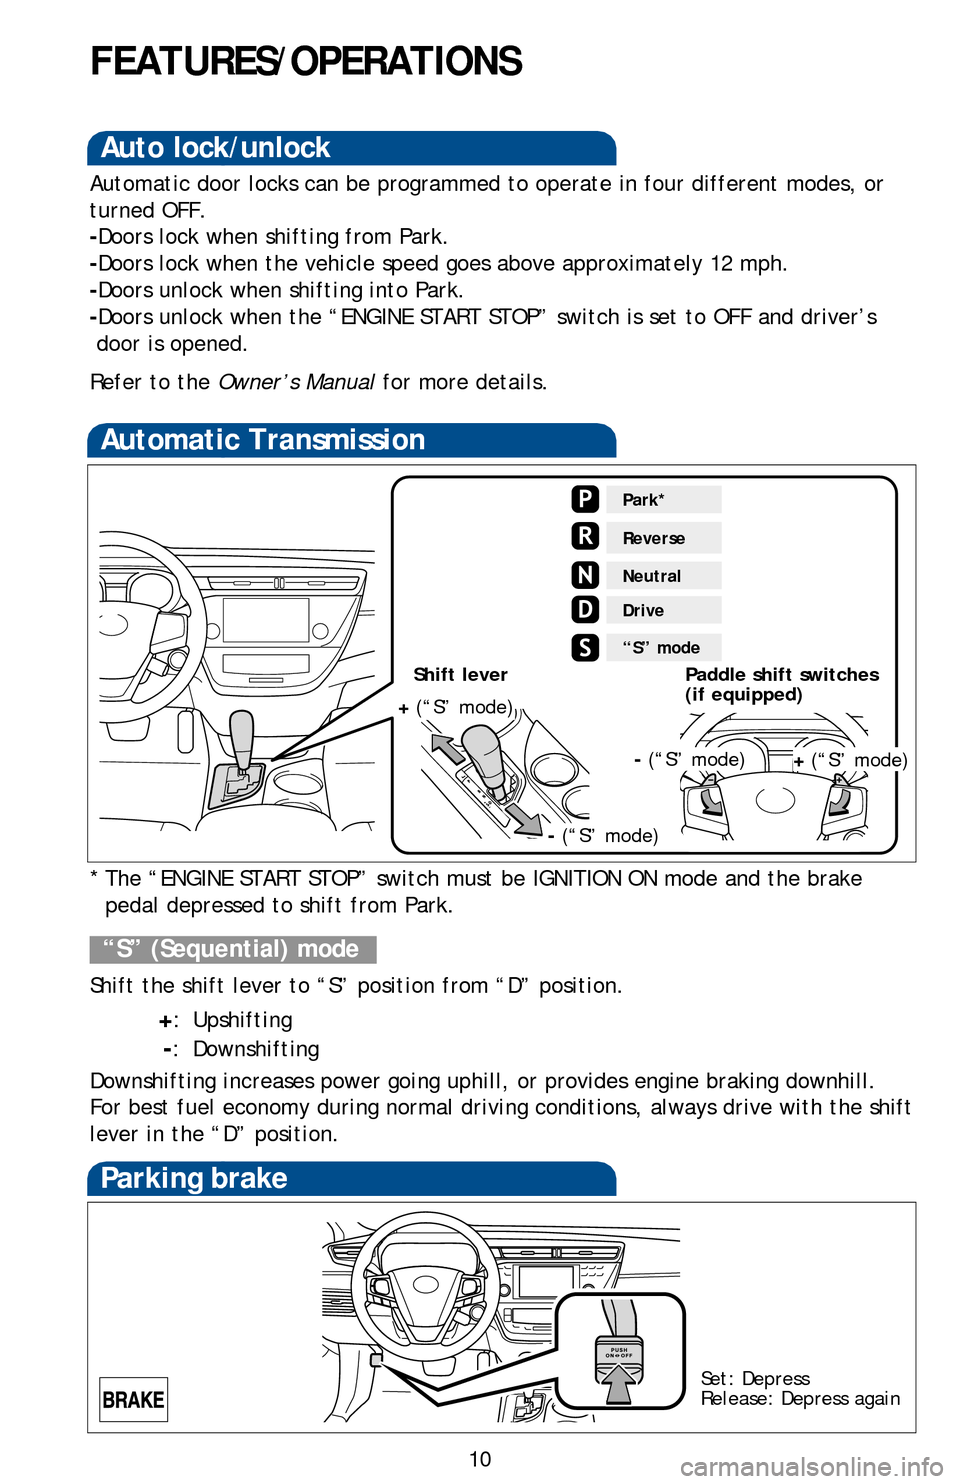 TOYOTA AVALON 2013 XX40 / 4.G Quick Reference Guide 10
FEATURES/OPERATIONS
Automatic Transmission
* The “ENGINE START STOP” switch must be IGNITION ON mode and the brake pedal depressed to shift from Park.
Shift the shift lever to “S” position 